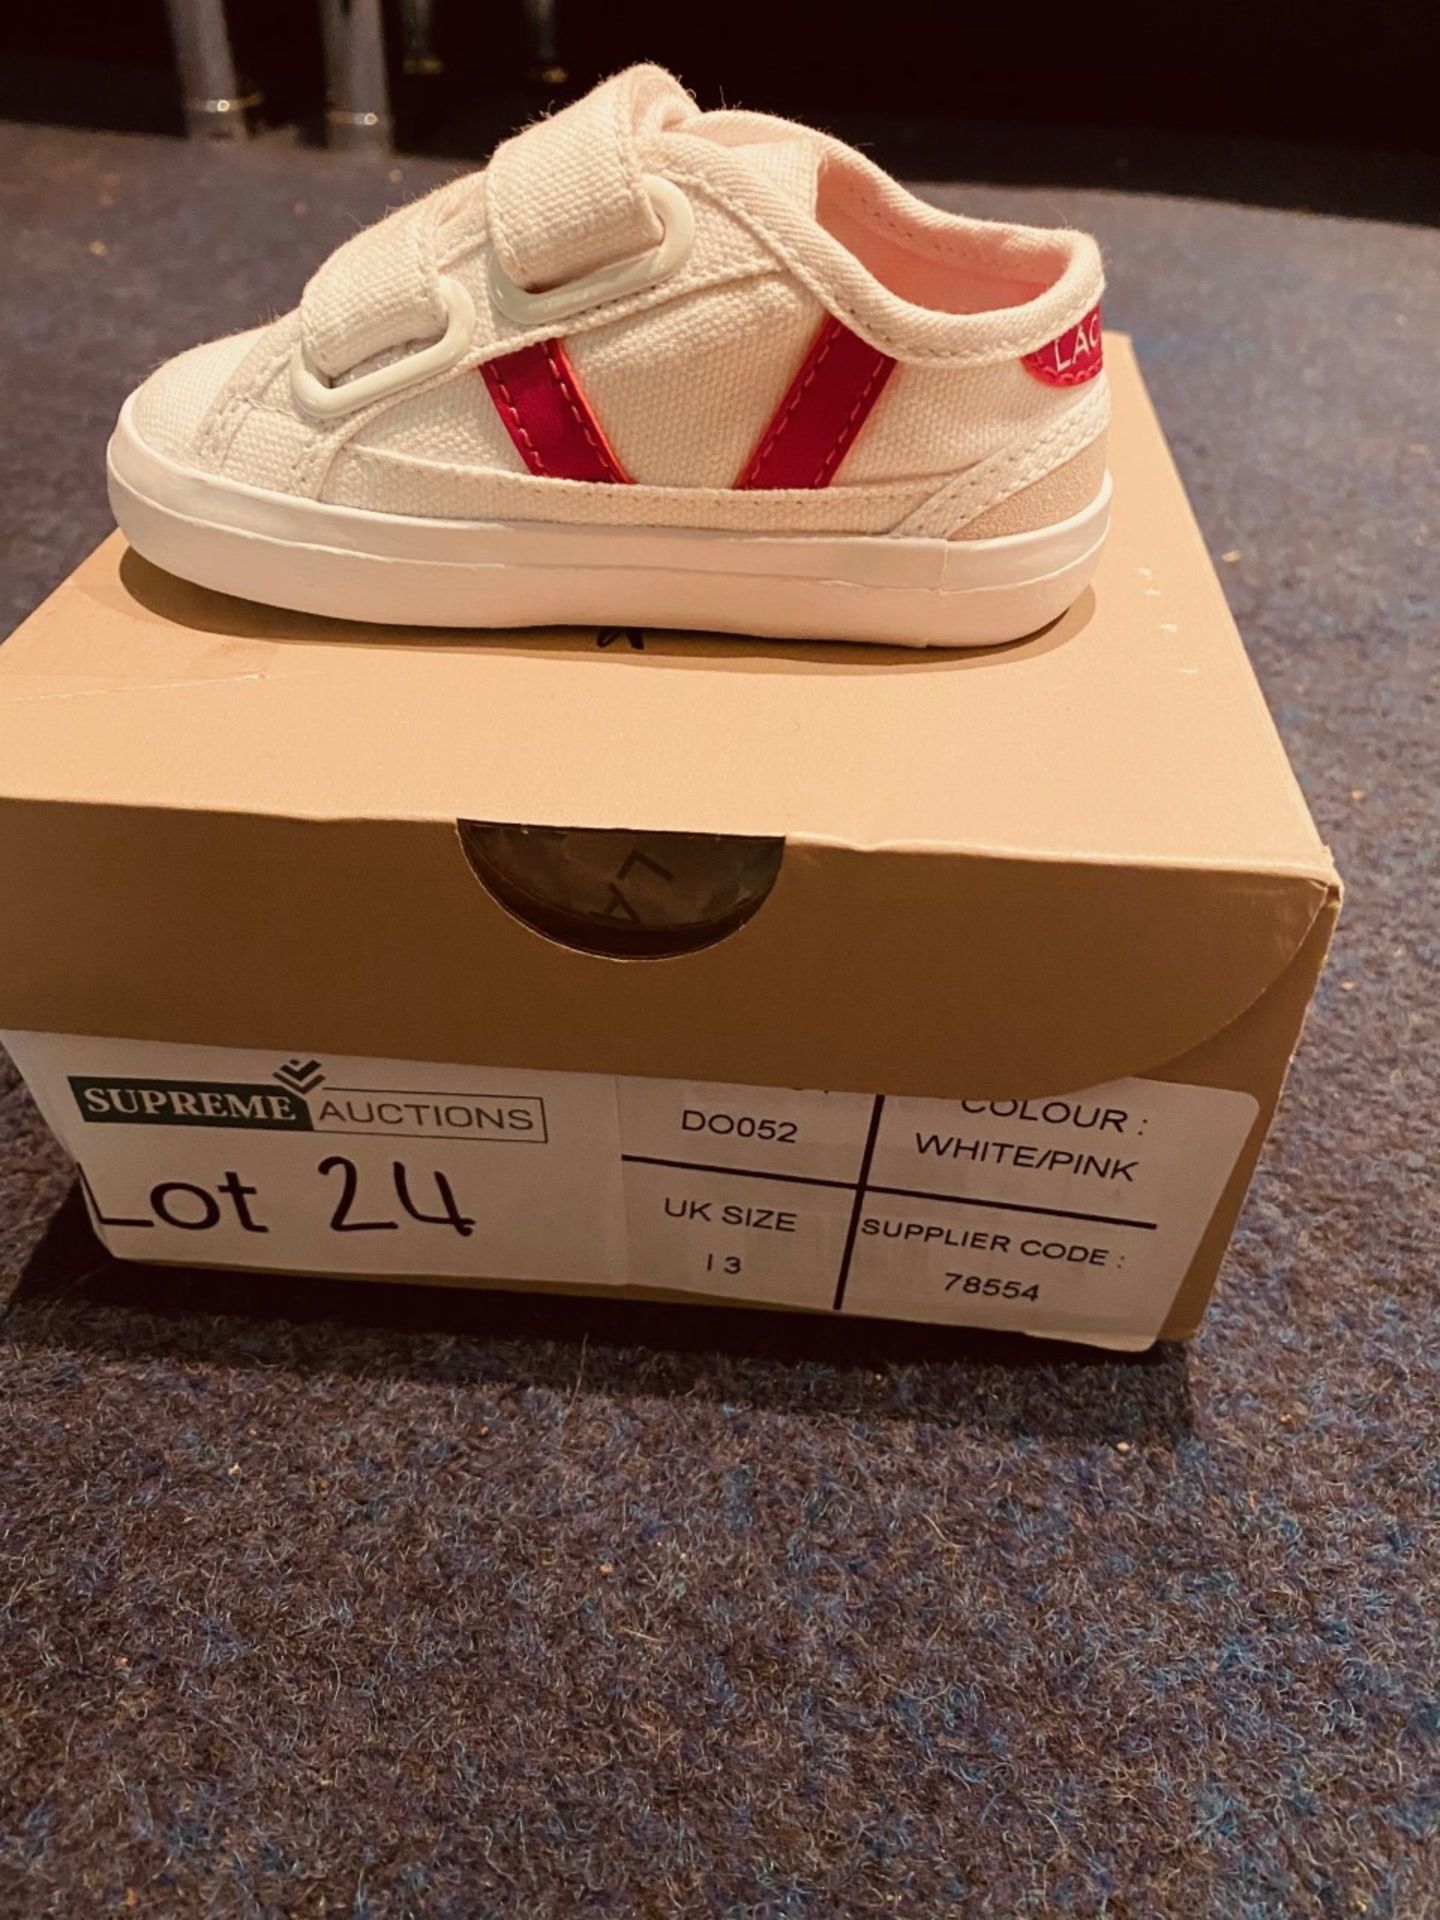 NEW AND BOXED LACOSTE WHITE/PINK UK13 - Image 2 of 2